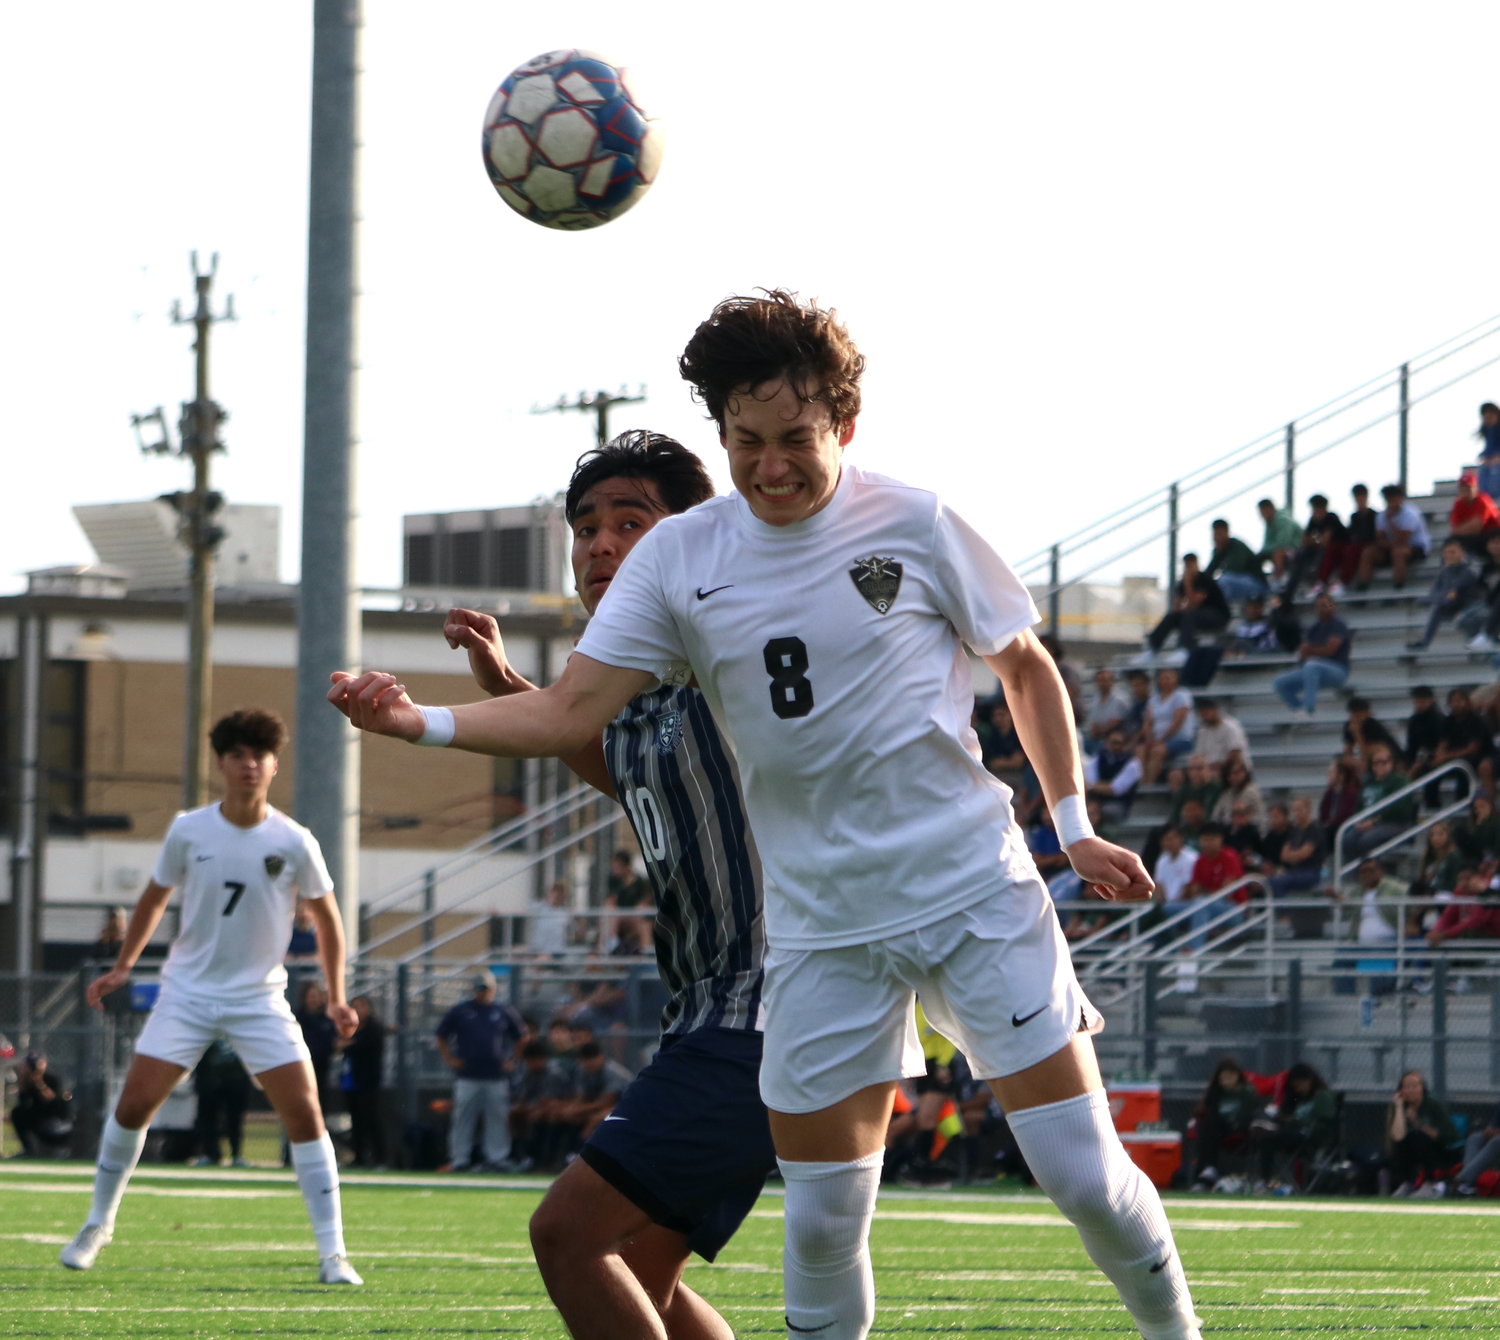 Marcelo Ojeda headers a ball during Tuesday's match between Jordan and Cy-Ridge at the Spring Woods football field.